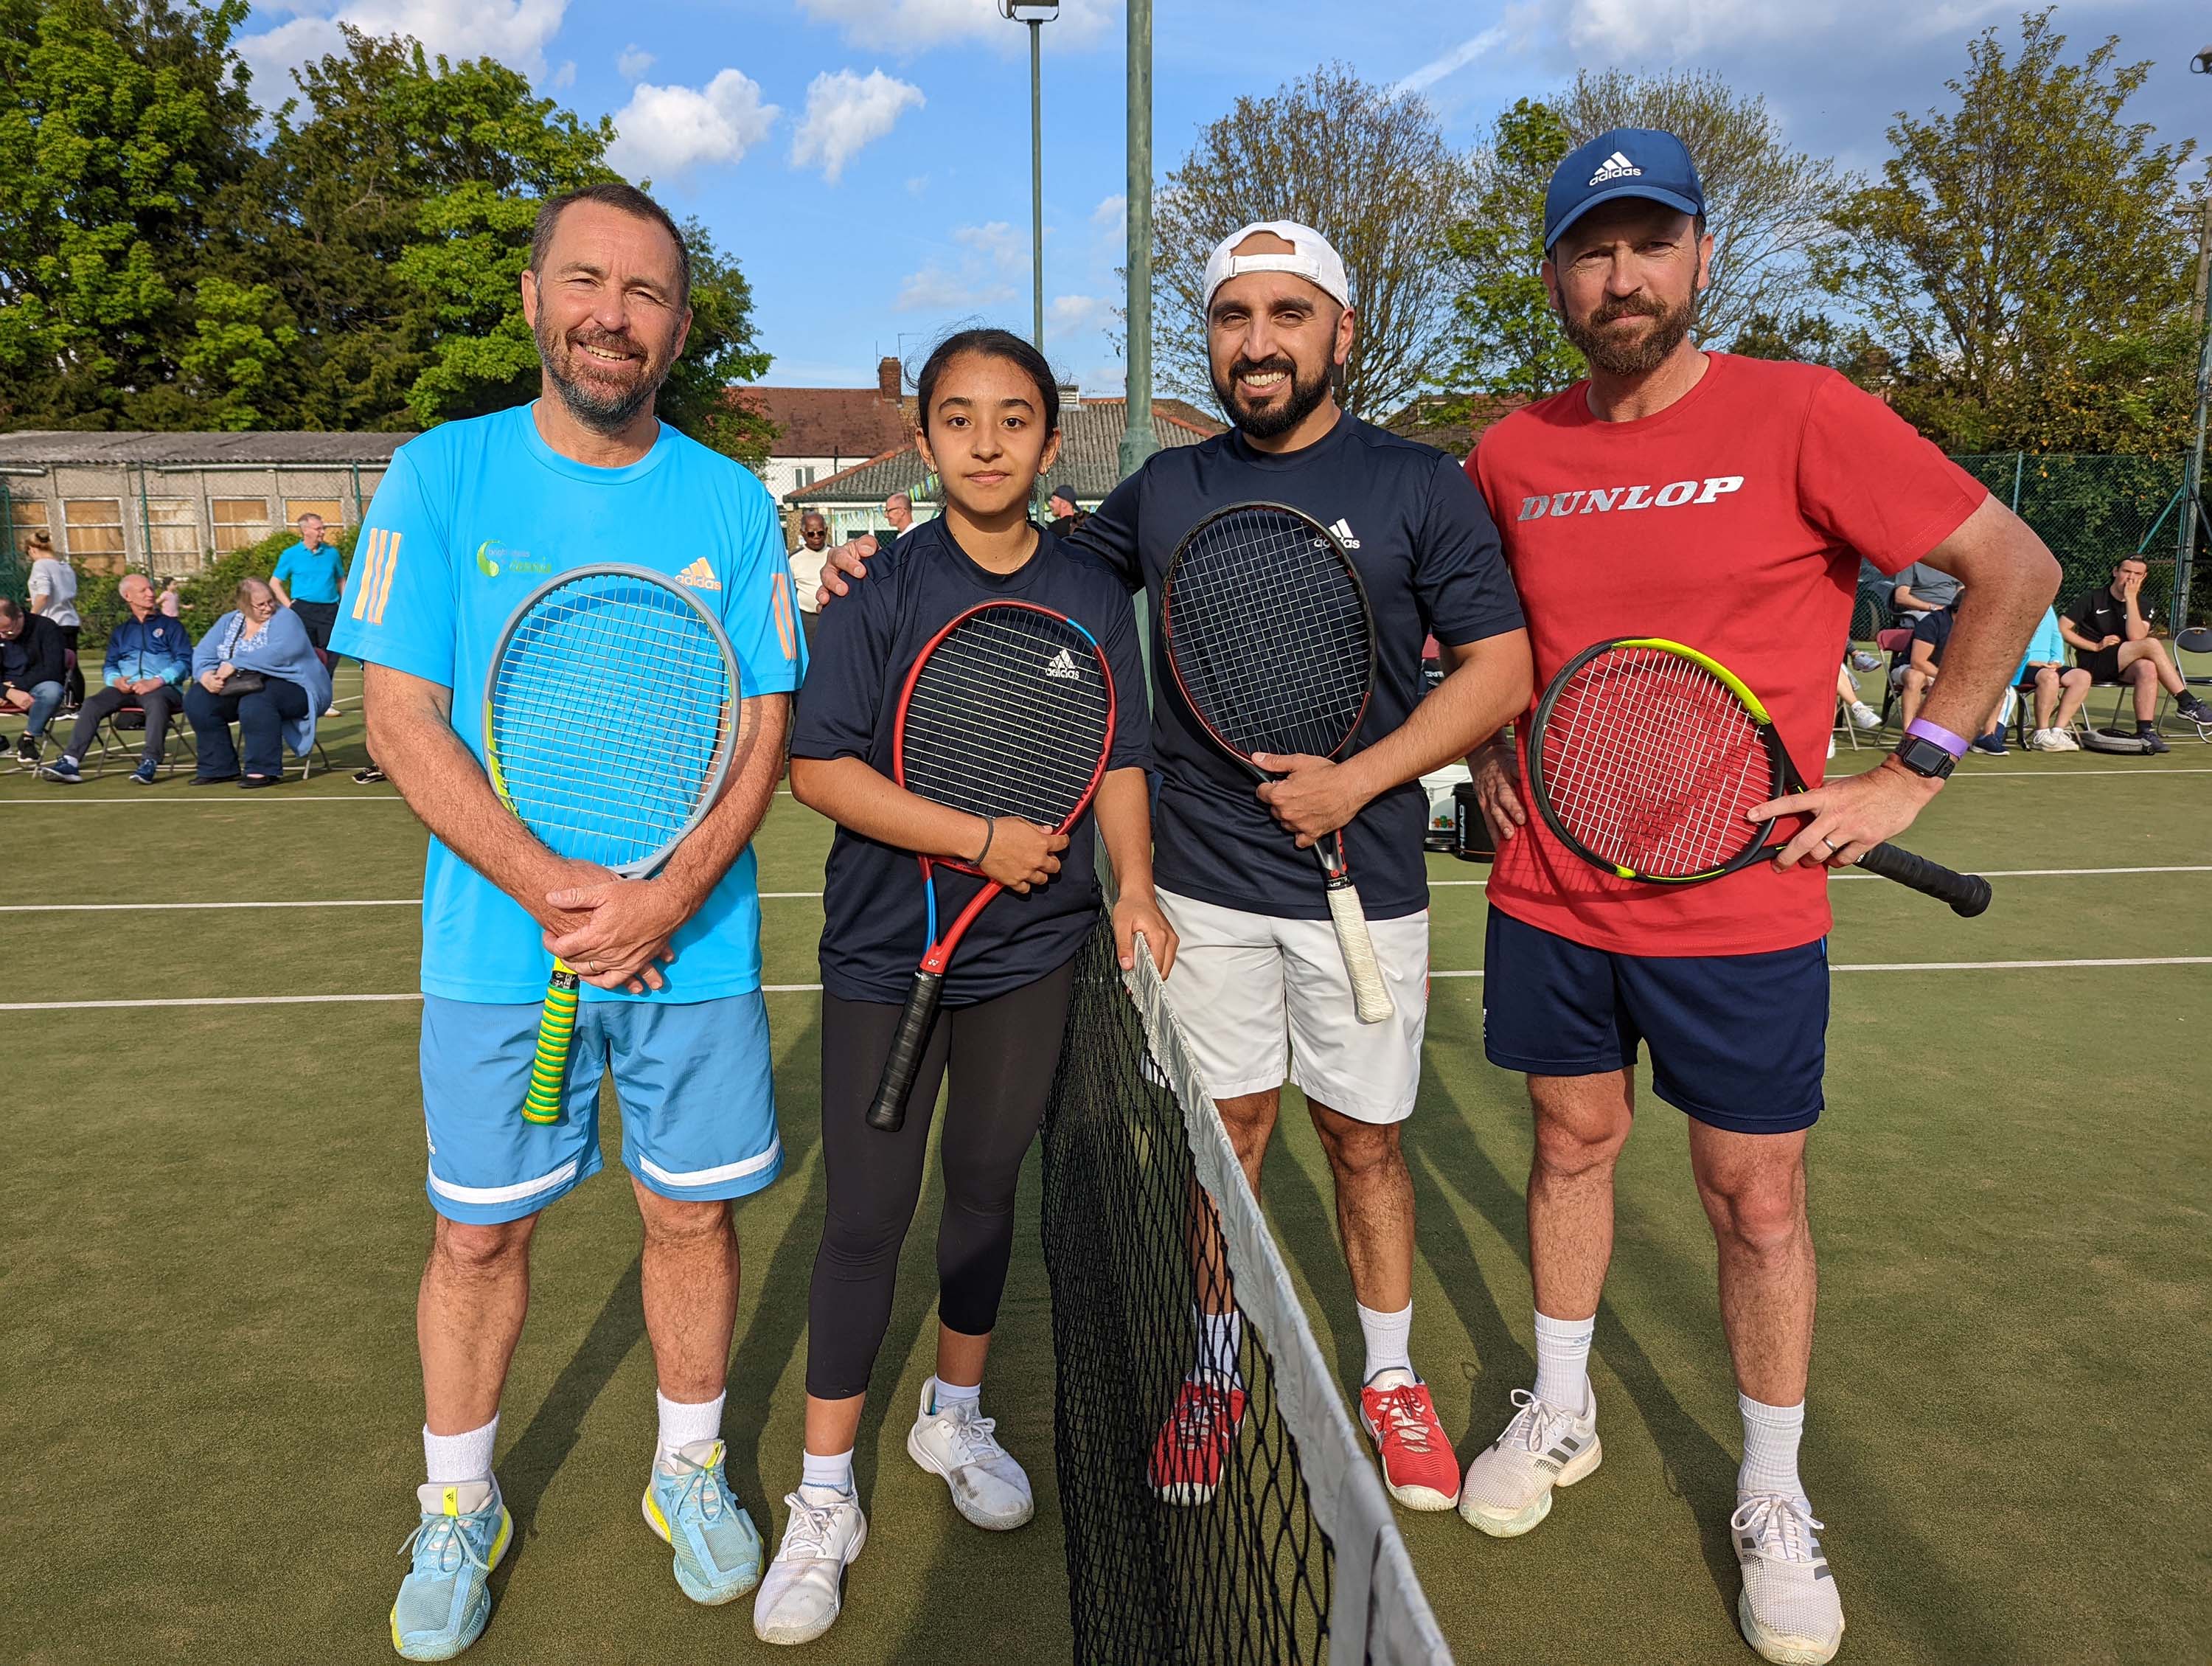 New Courts for Mayfield Tennis Club a Sports crowdfunding project in